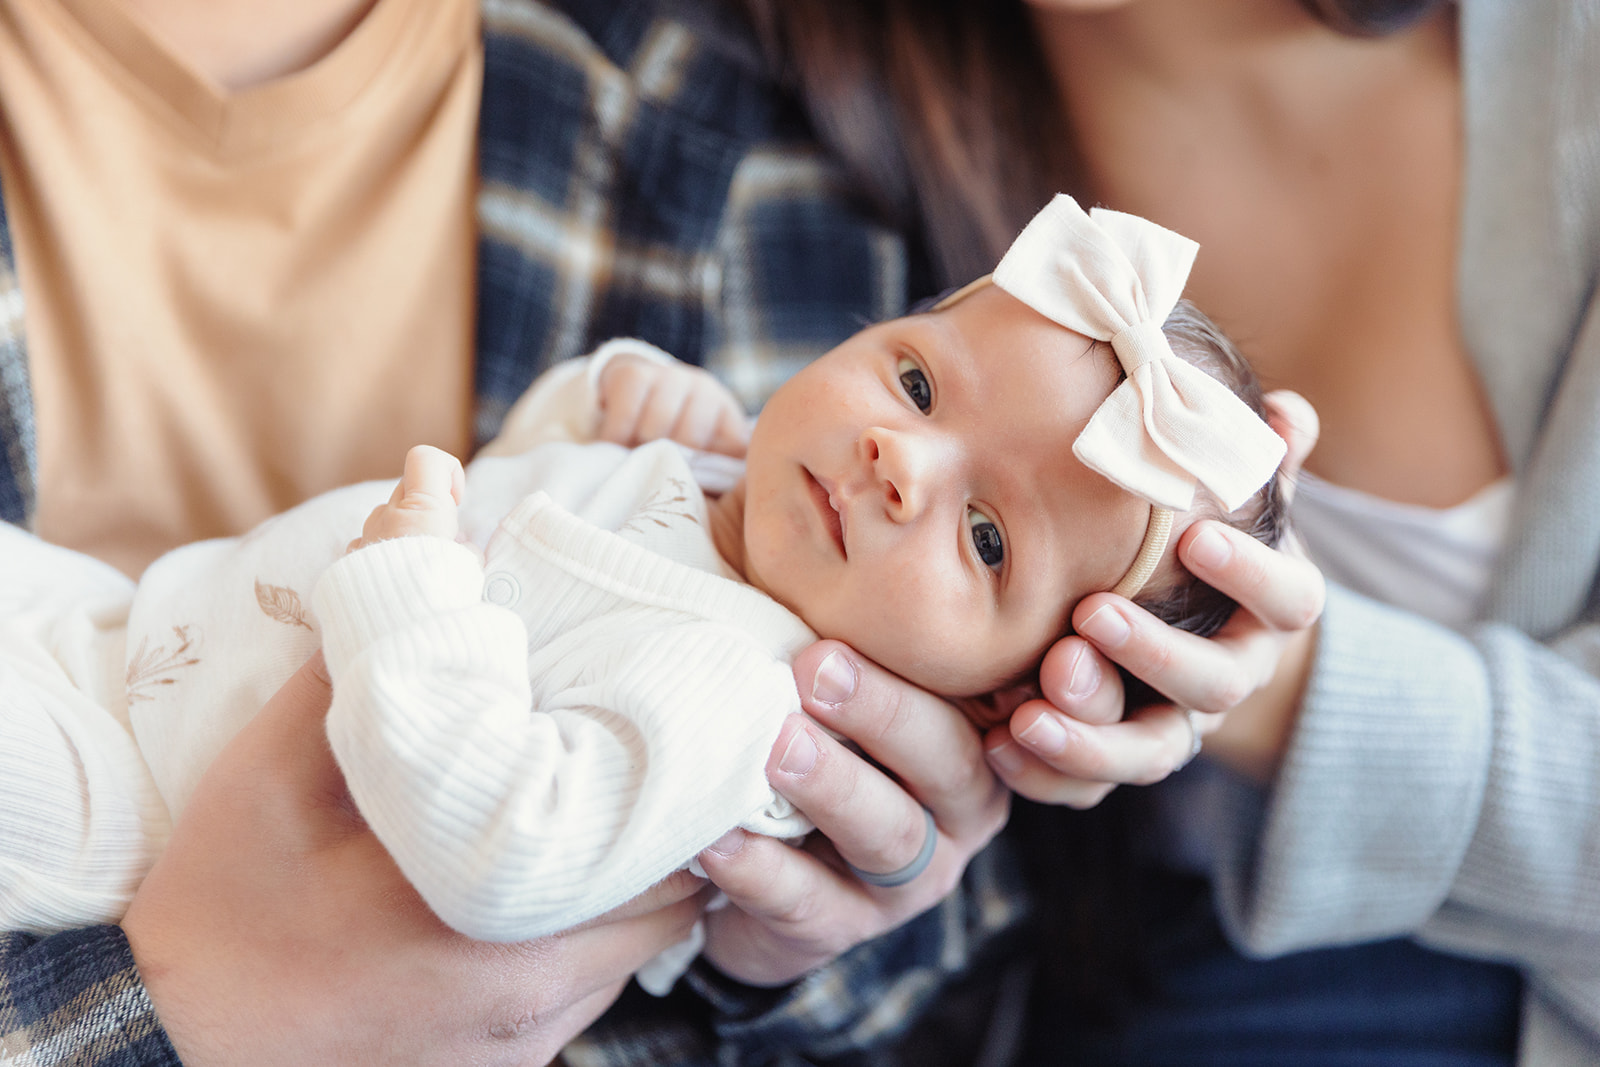 A beautiful In-Home Lifestyle Newborn Session held in Harrod, Ohio.